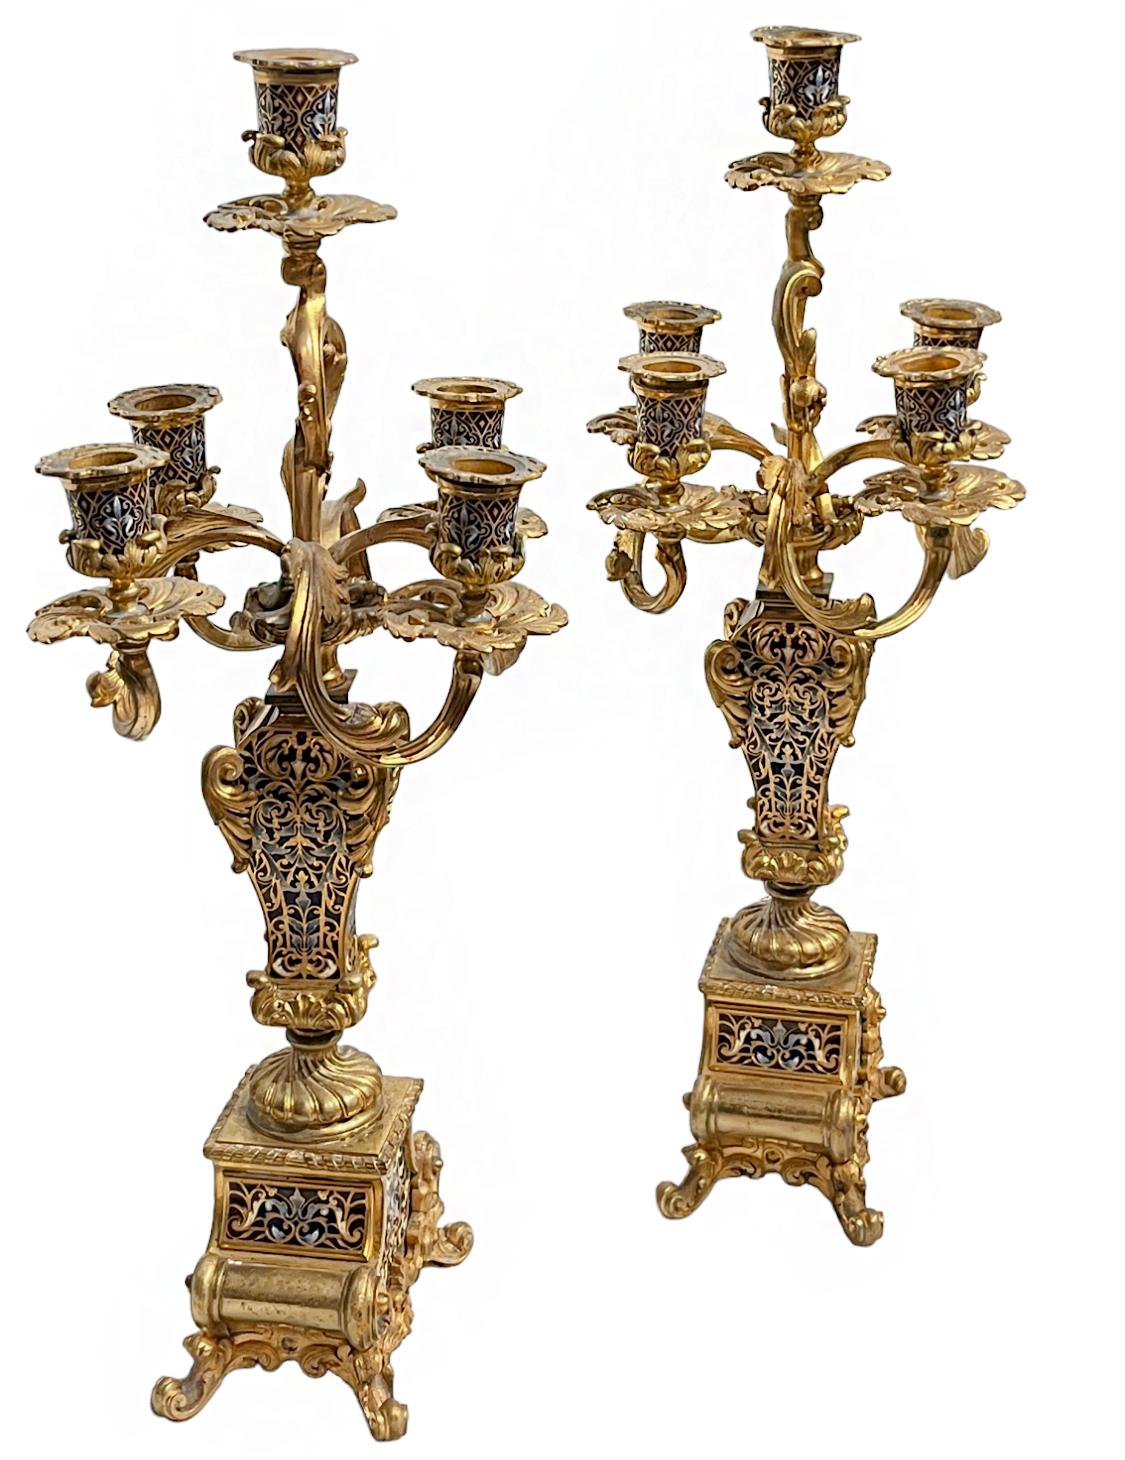 Enameled Pair of Champlevé and Gilt-bronze Five-light Candelabra For Sale